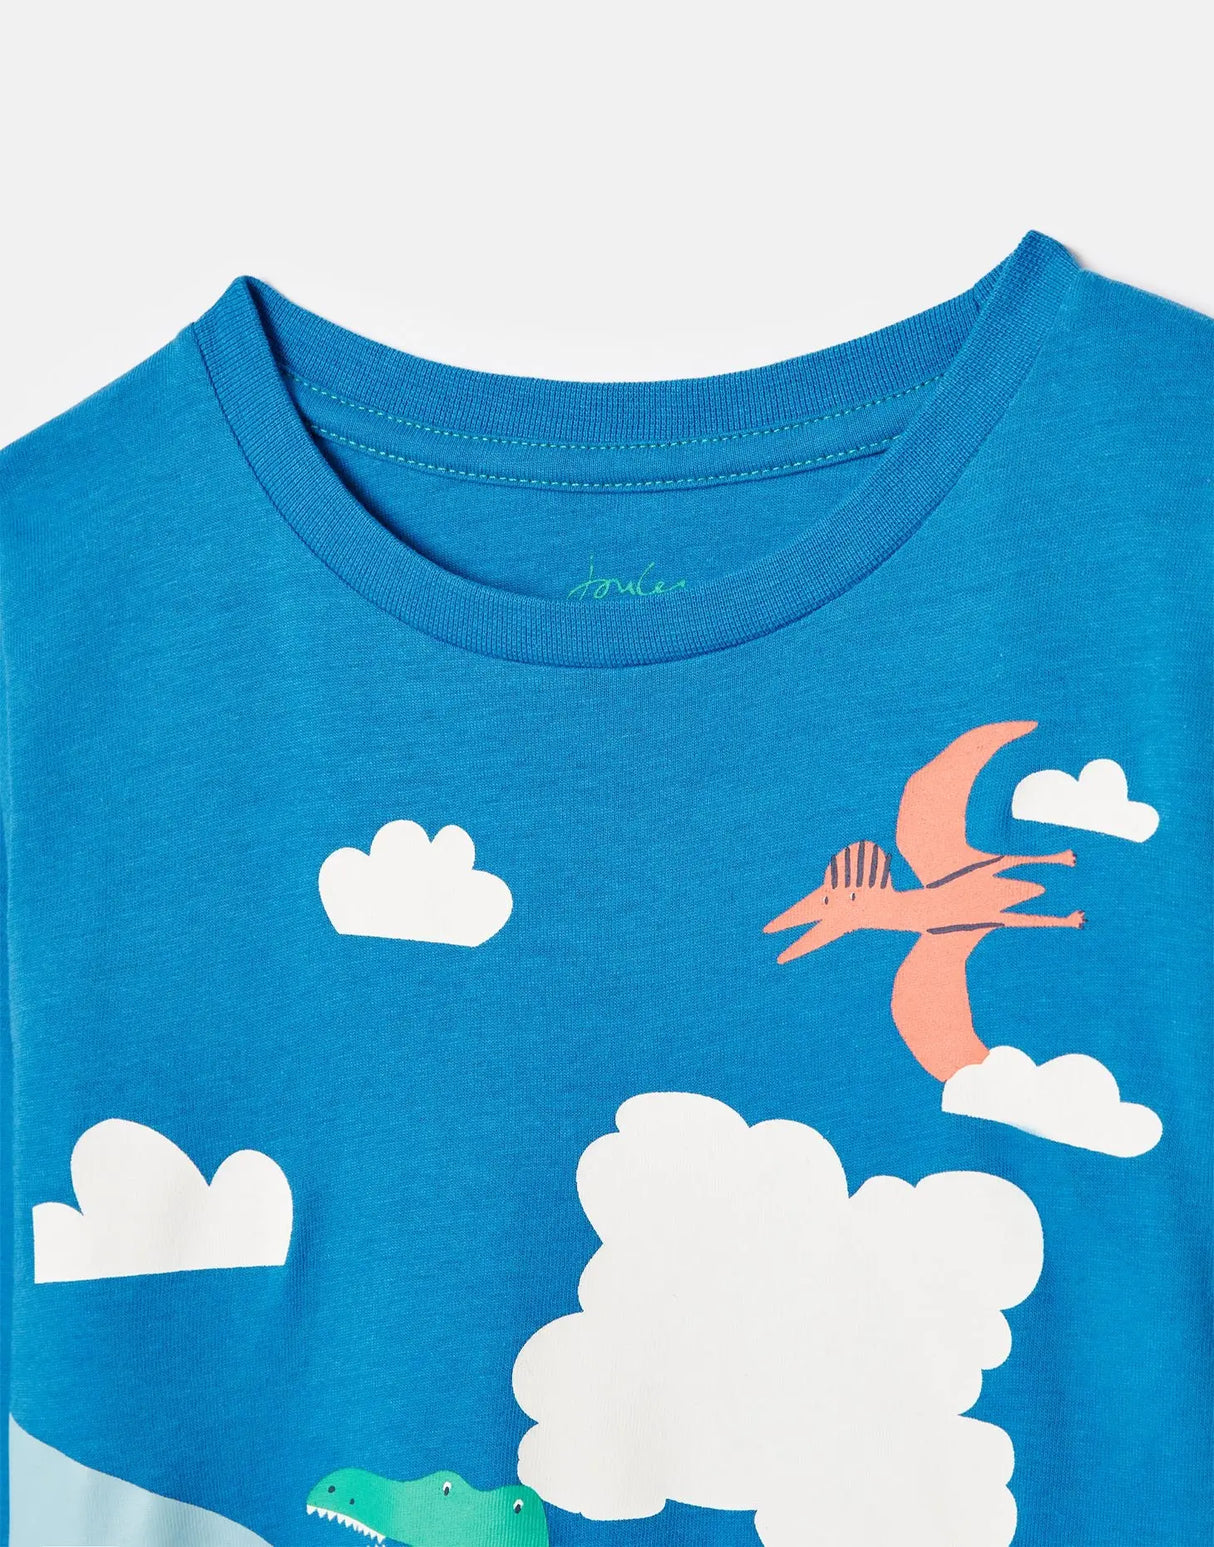 Finlay Long Sleeve T-Shirt - Dino | Joules - Joules